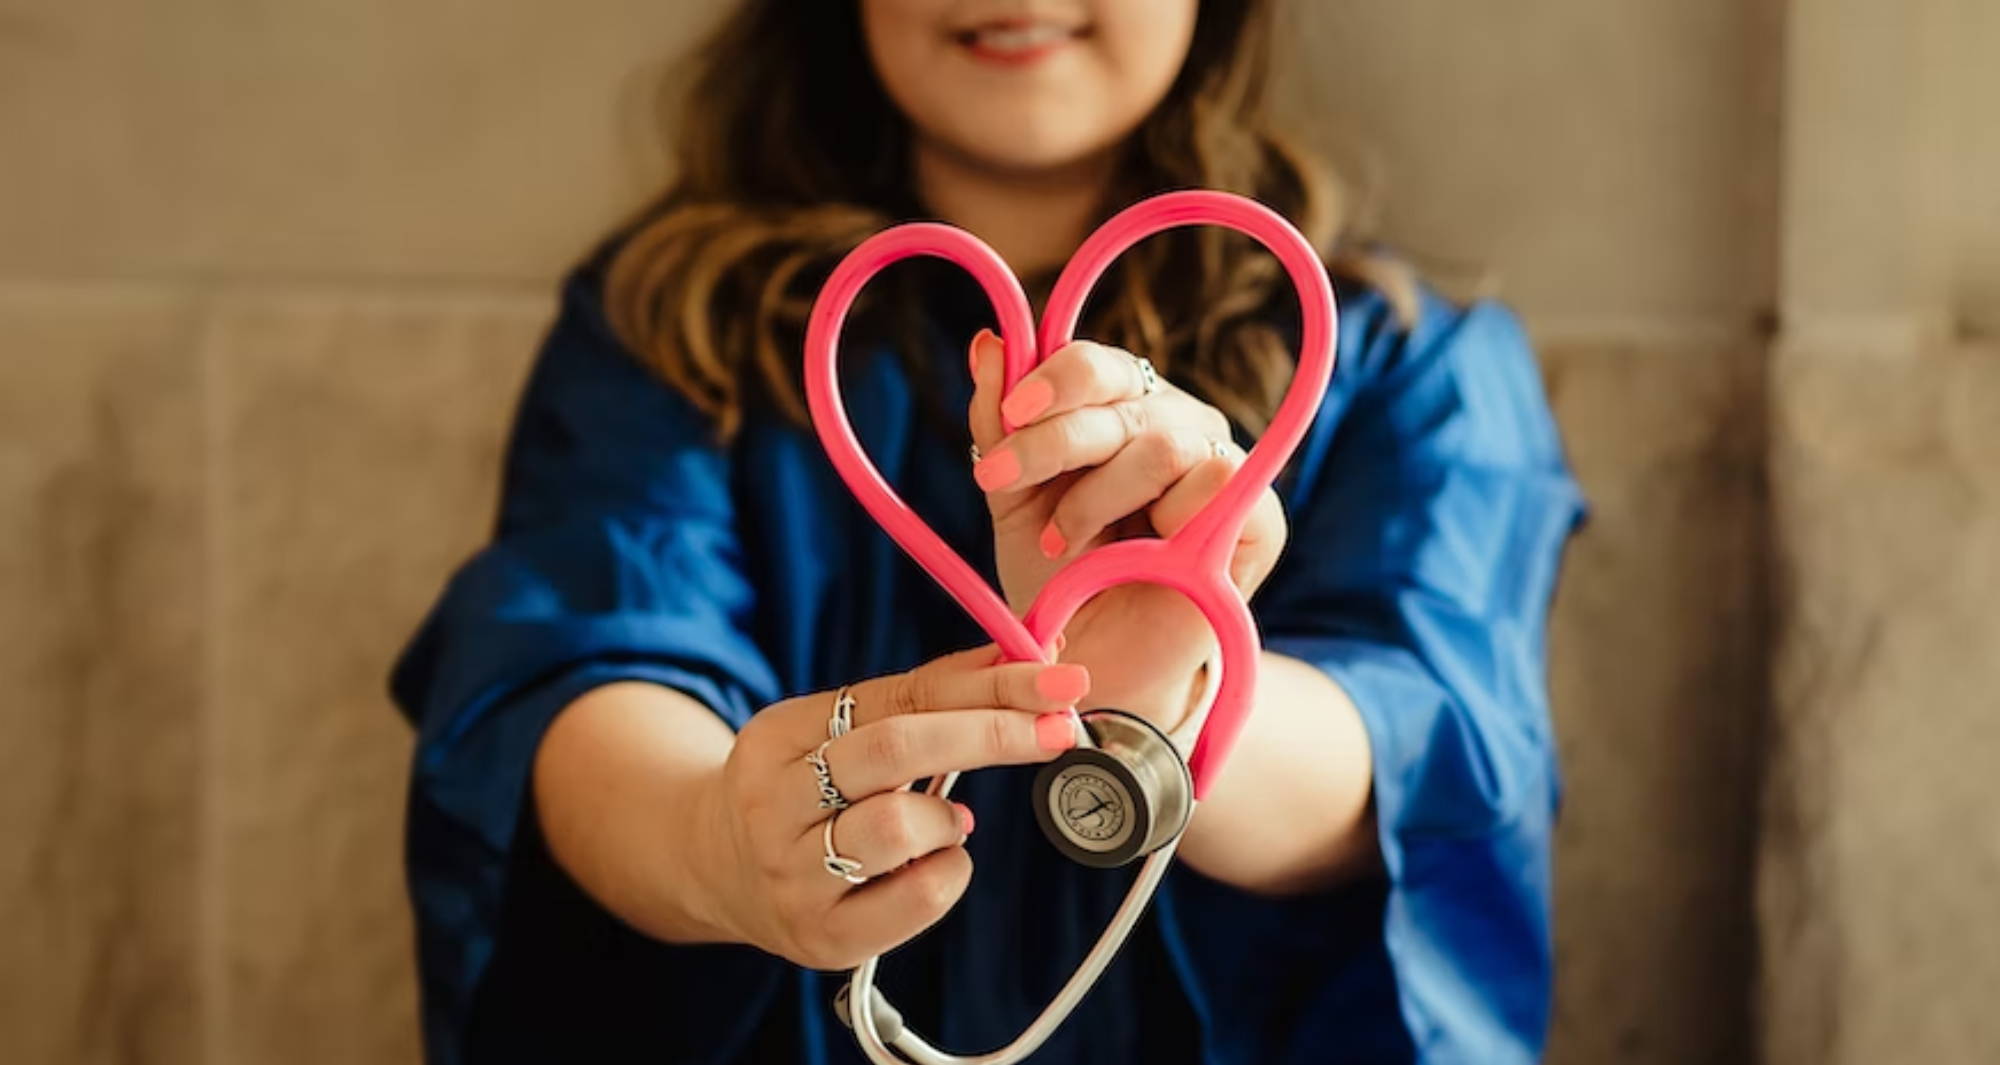 A woman in a blue uniform holds up a pink stethoscope bent into a heart shape.